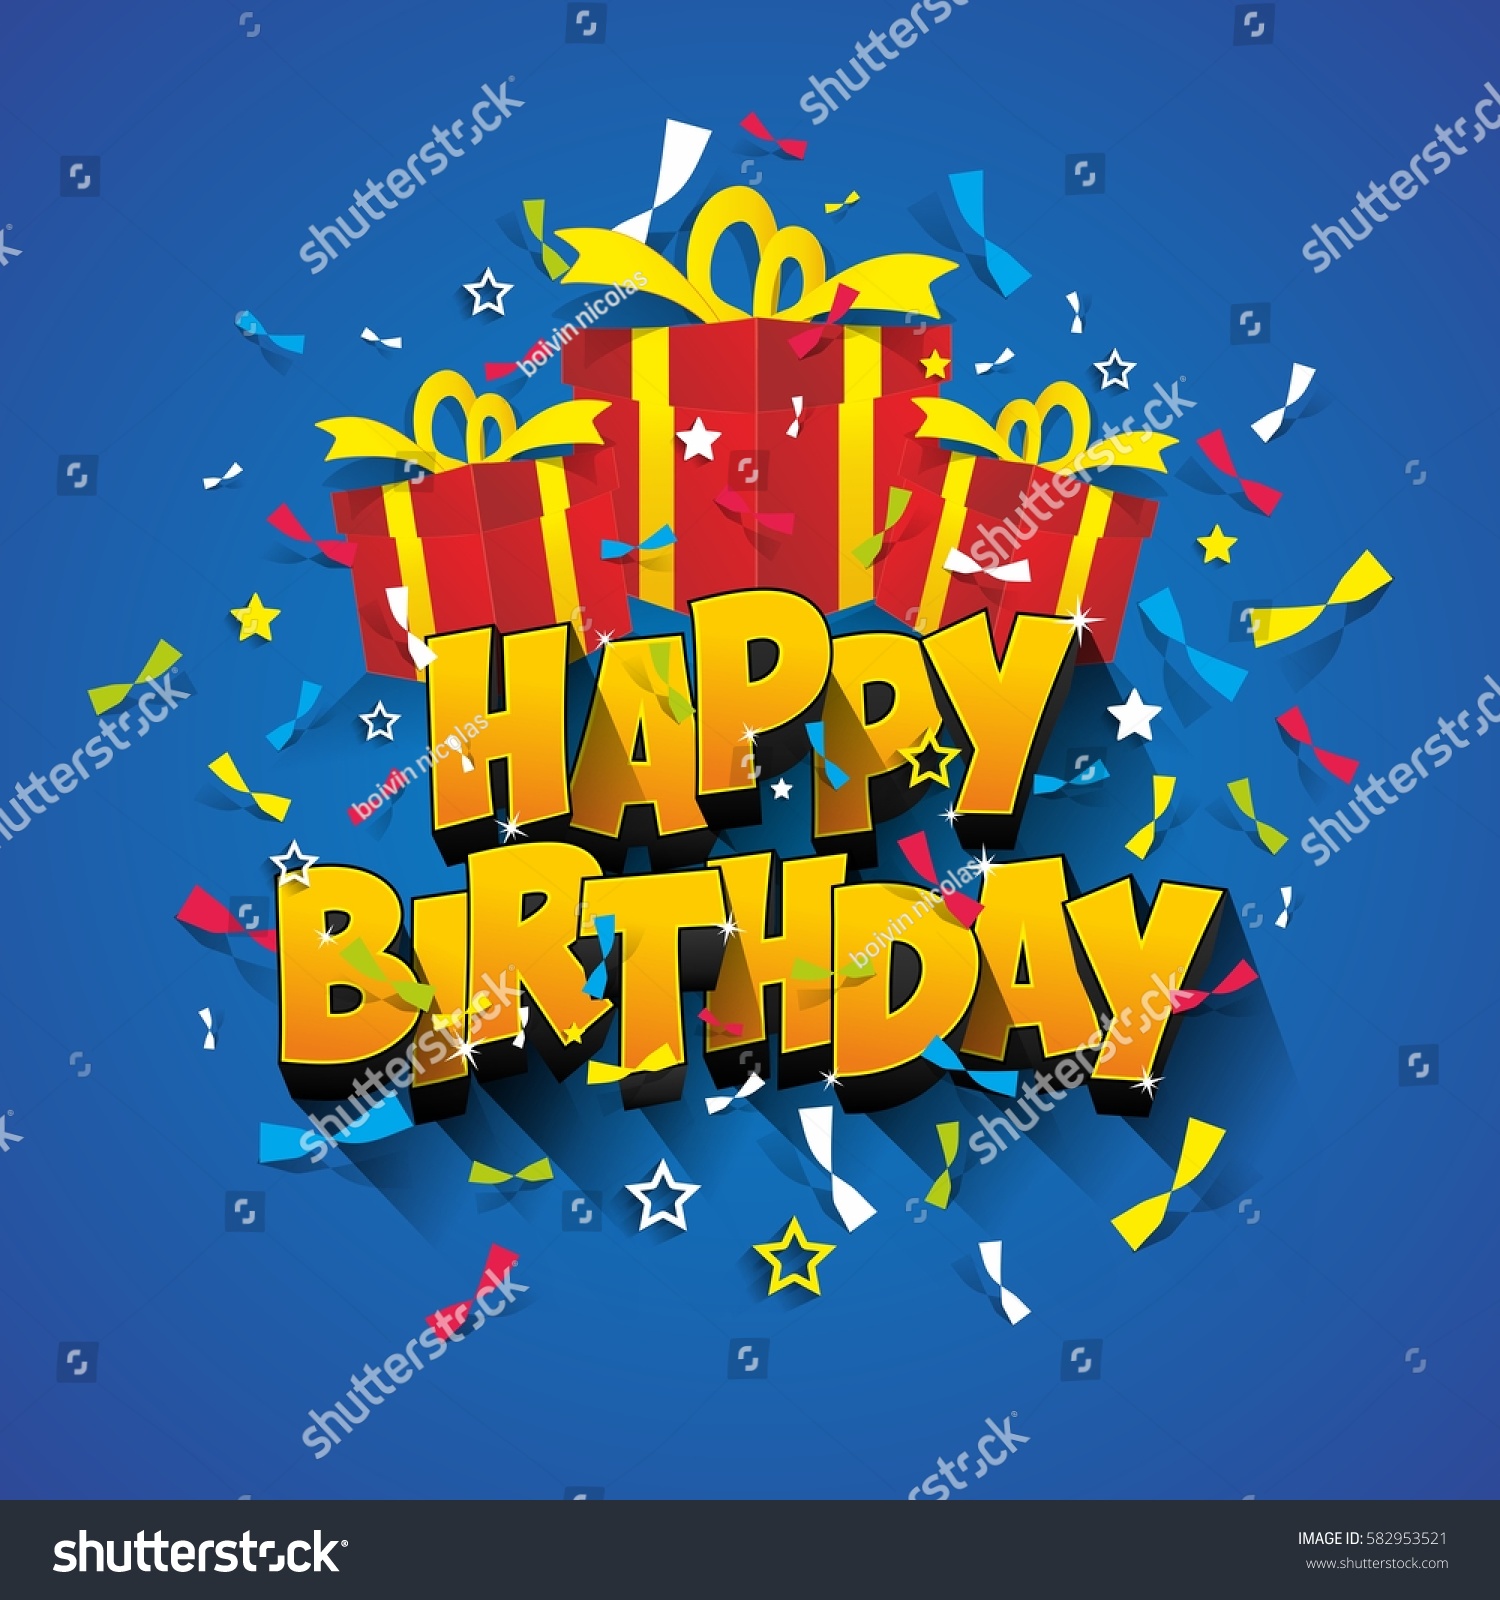 Happy Birthday Text Gift Boxes On Stock Vector 582953521 - Shutterstock